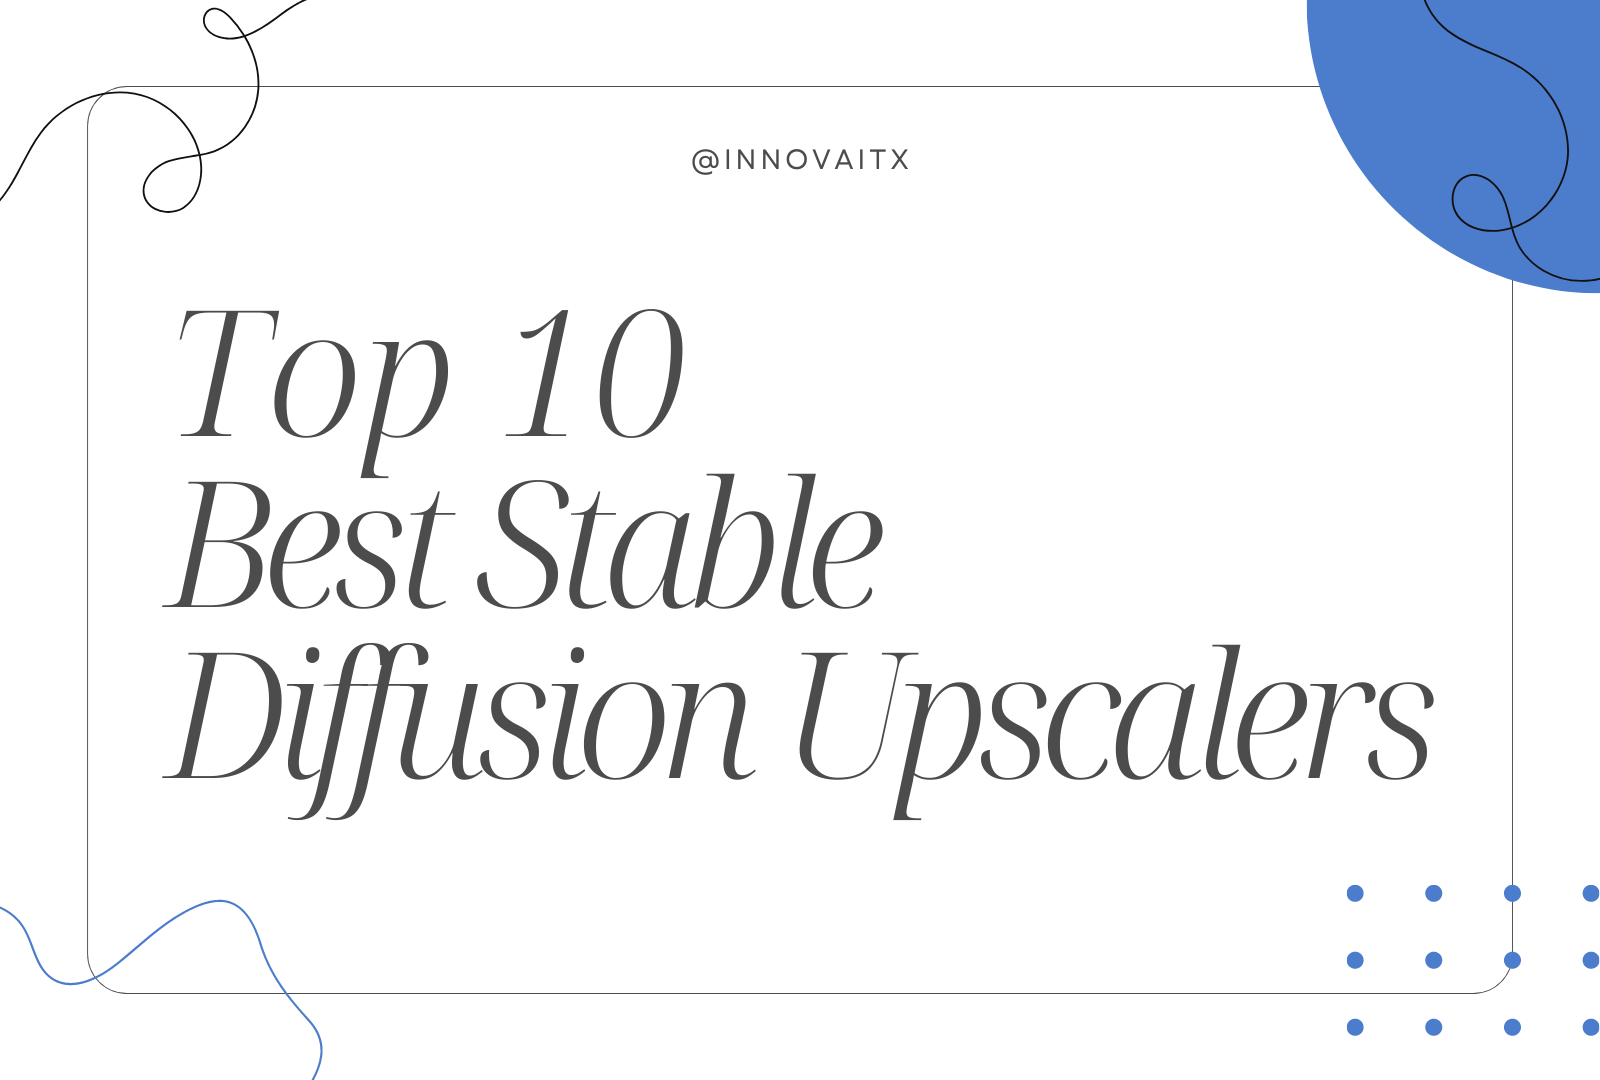 Best Stable Diffusion Upscalers